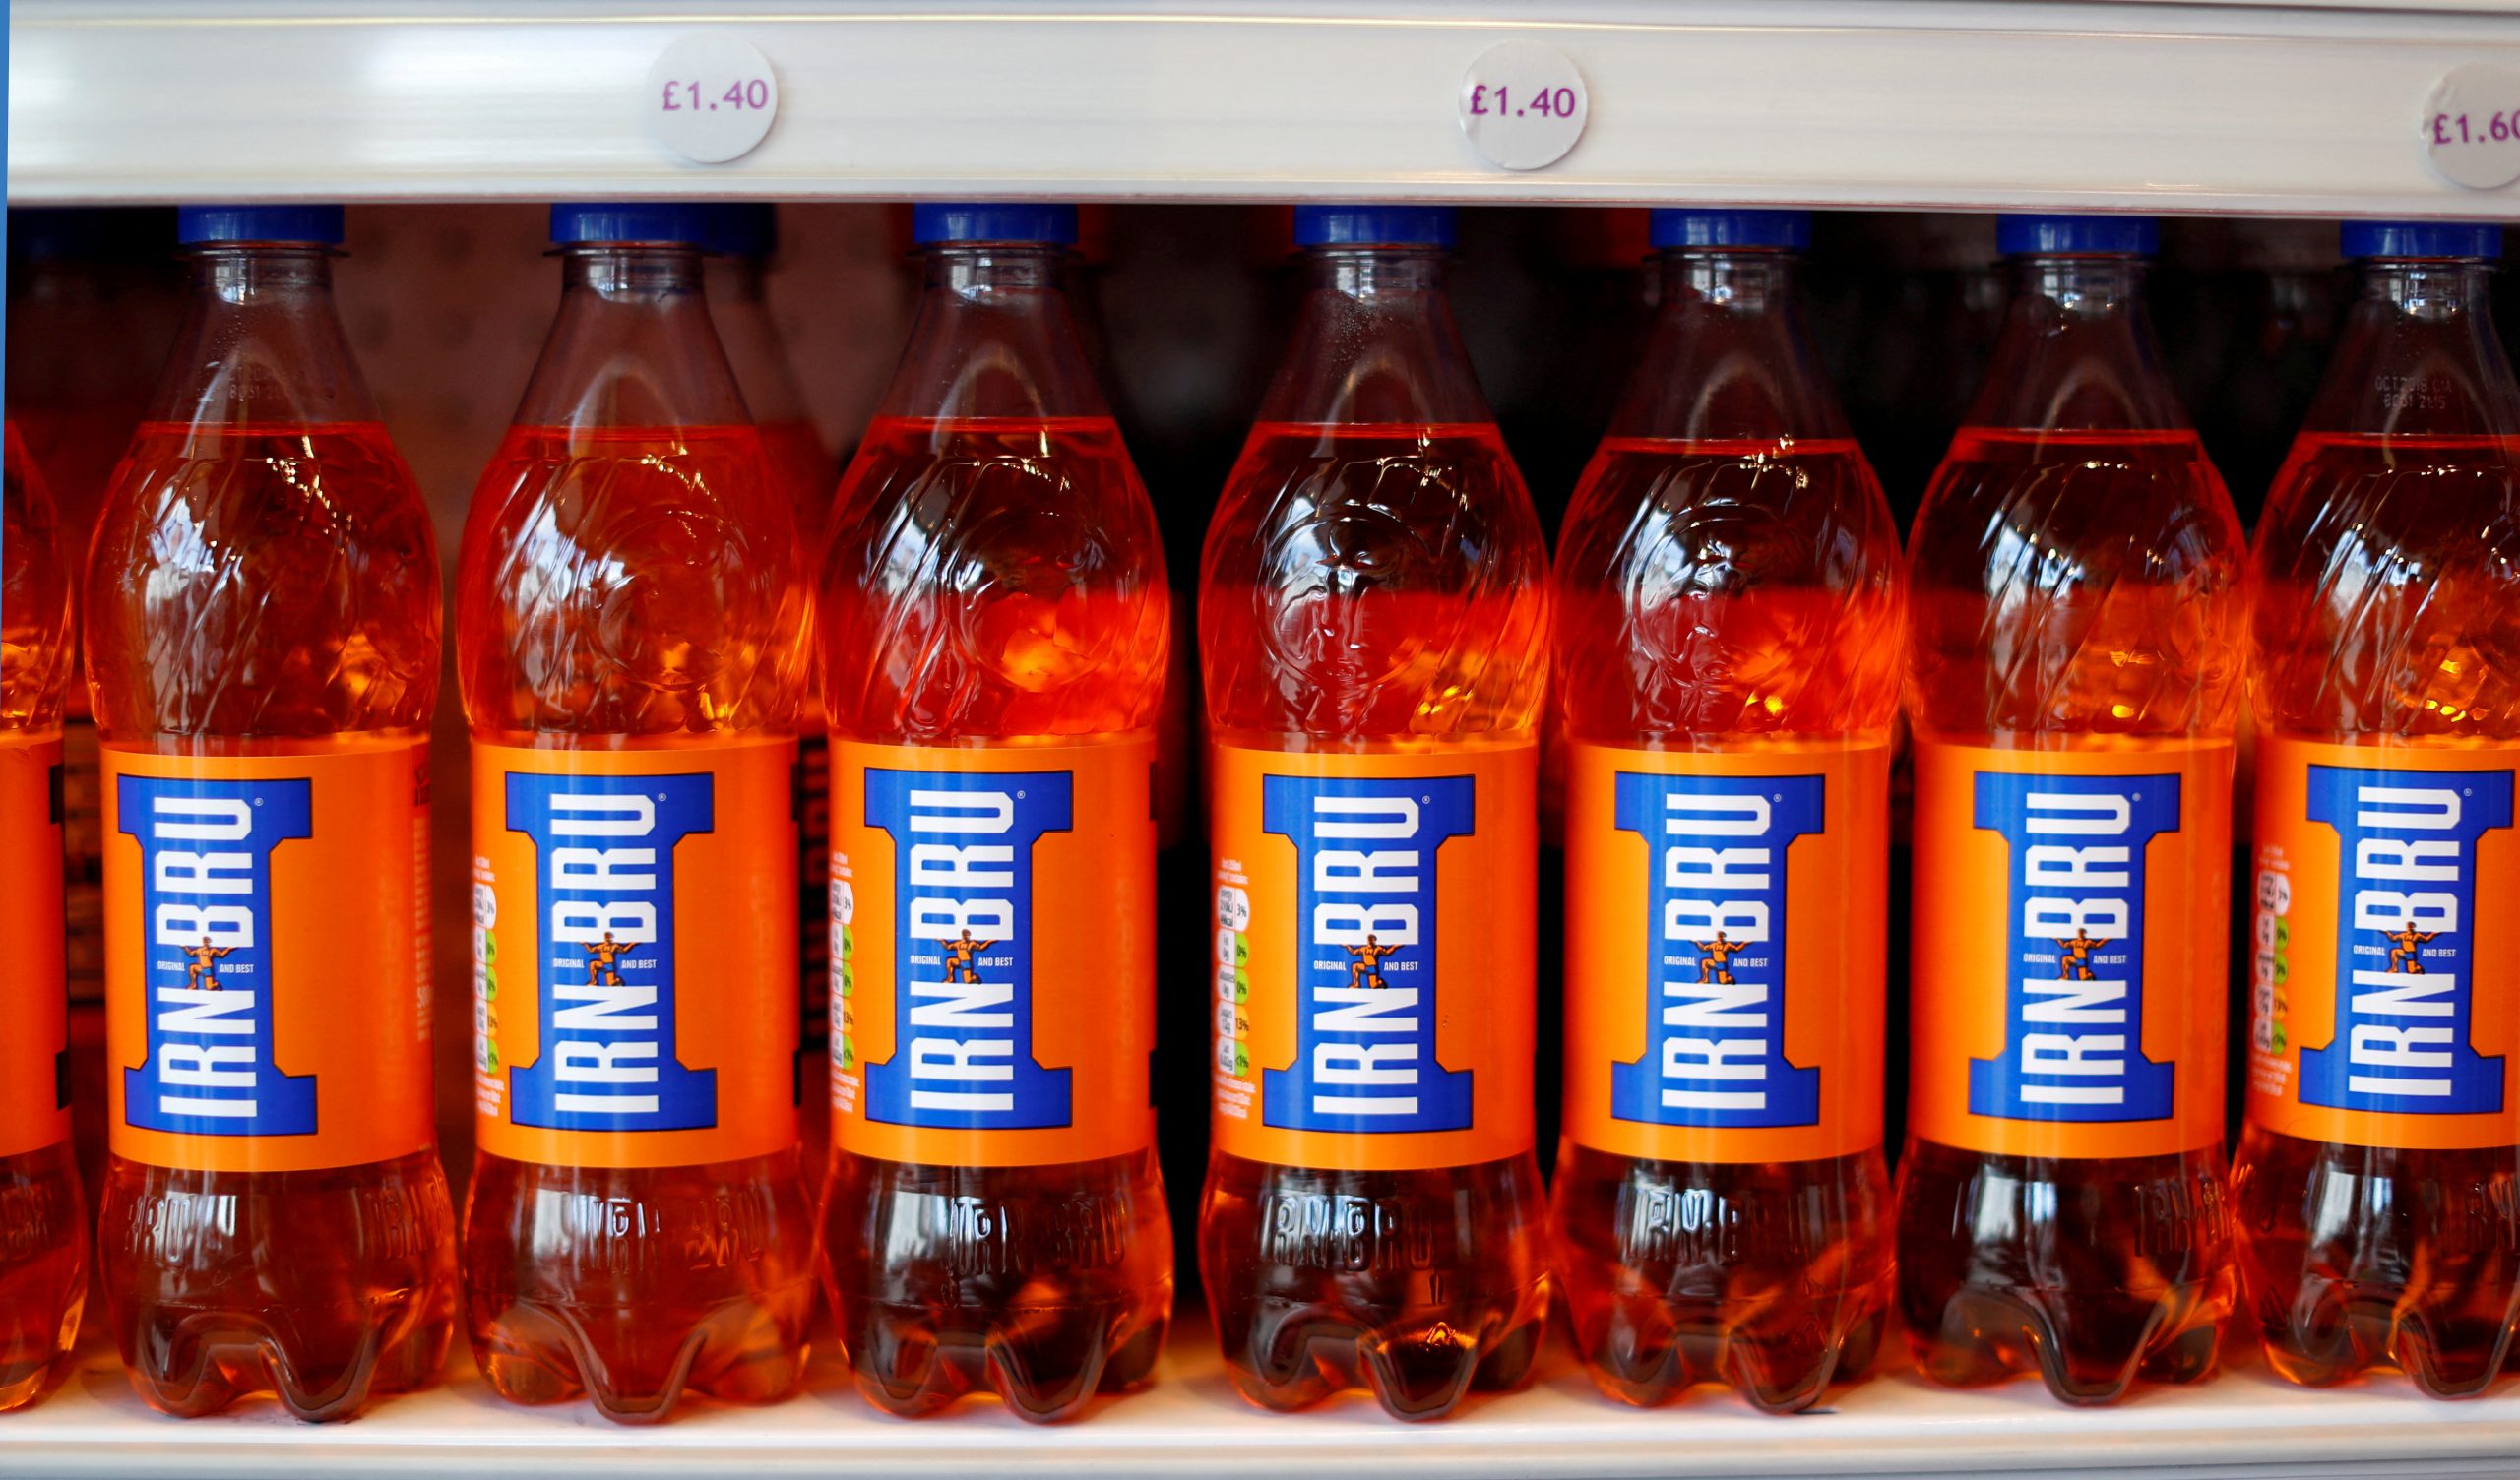 Irn-Bru maker reports surge in sales in recent sunny days amid inflation